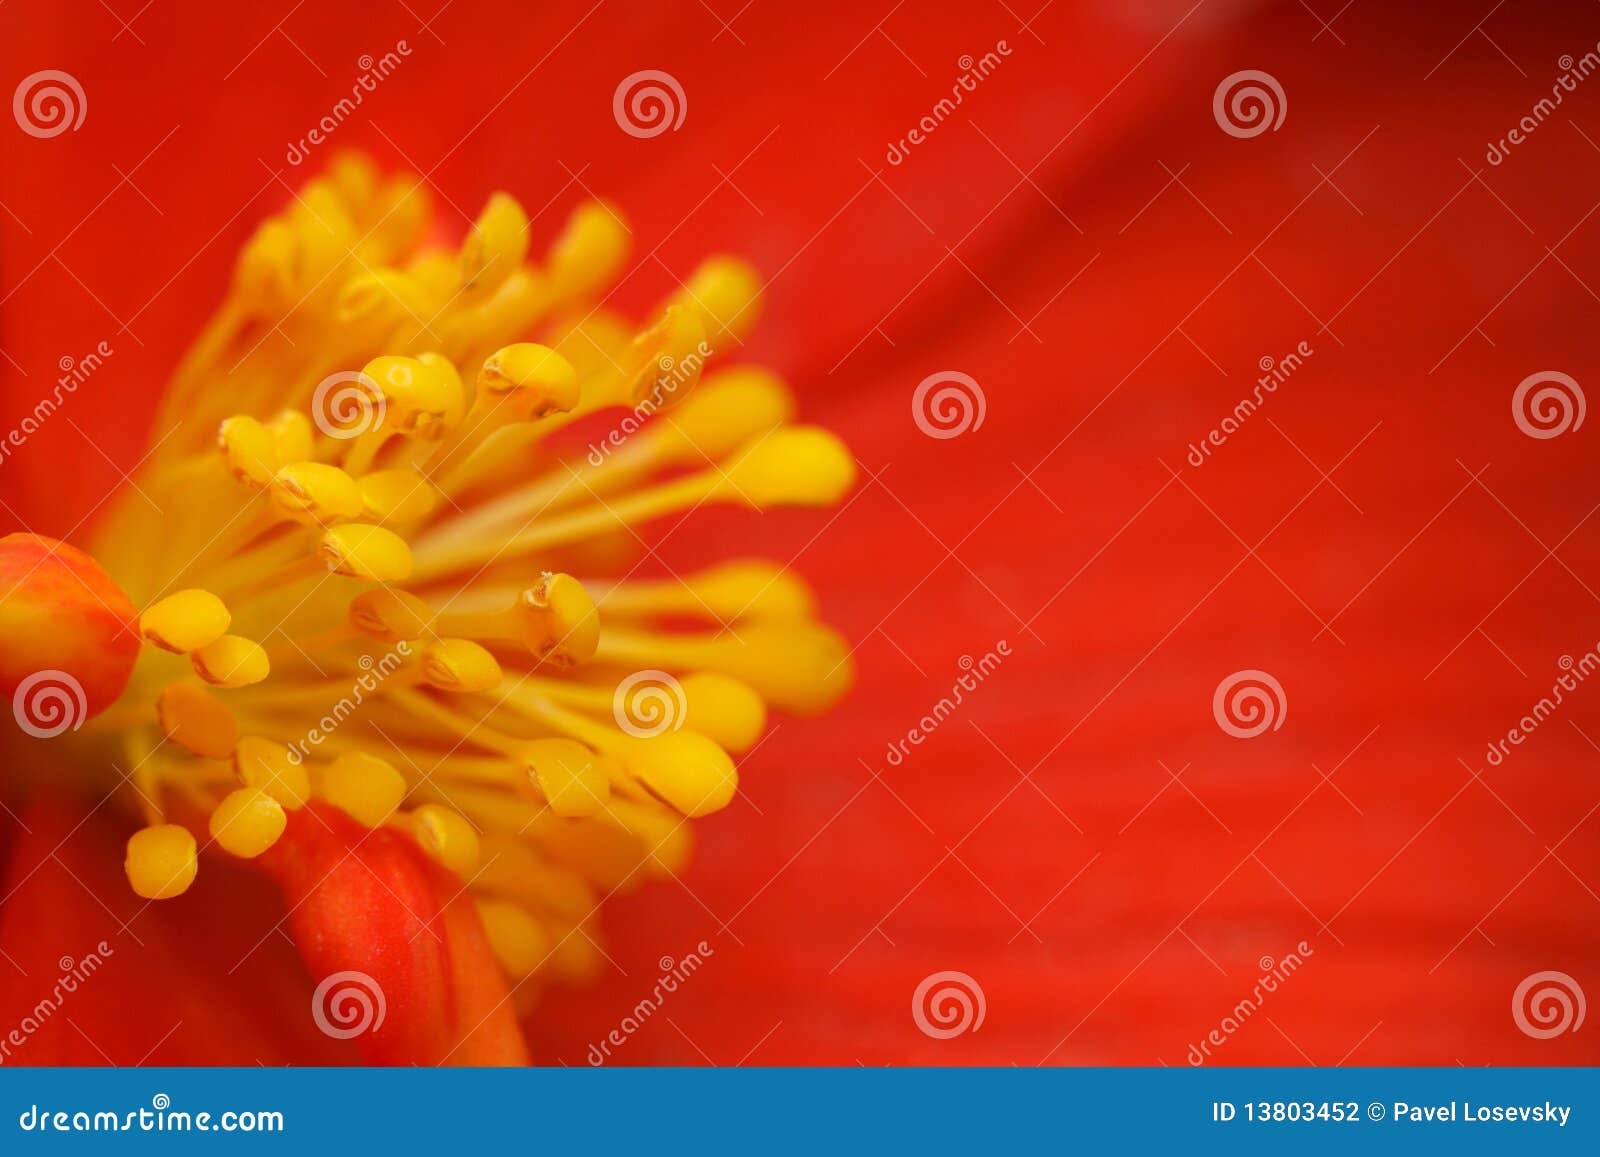 yellow stamens of flower begonia with red petals